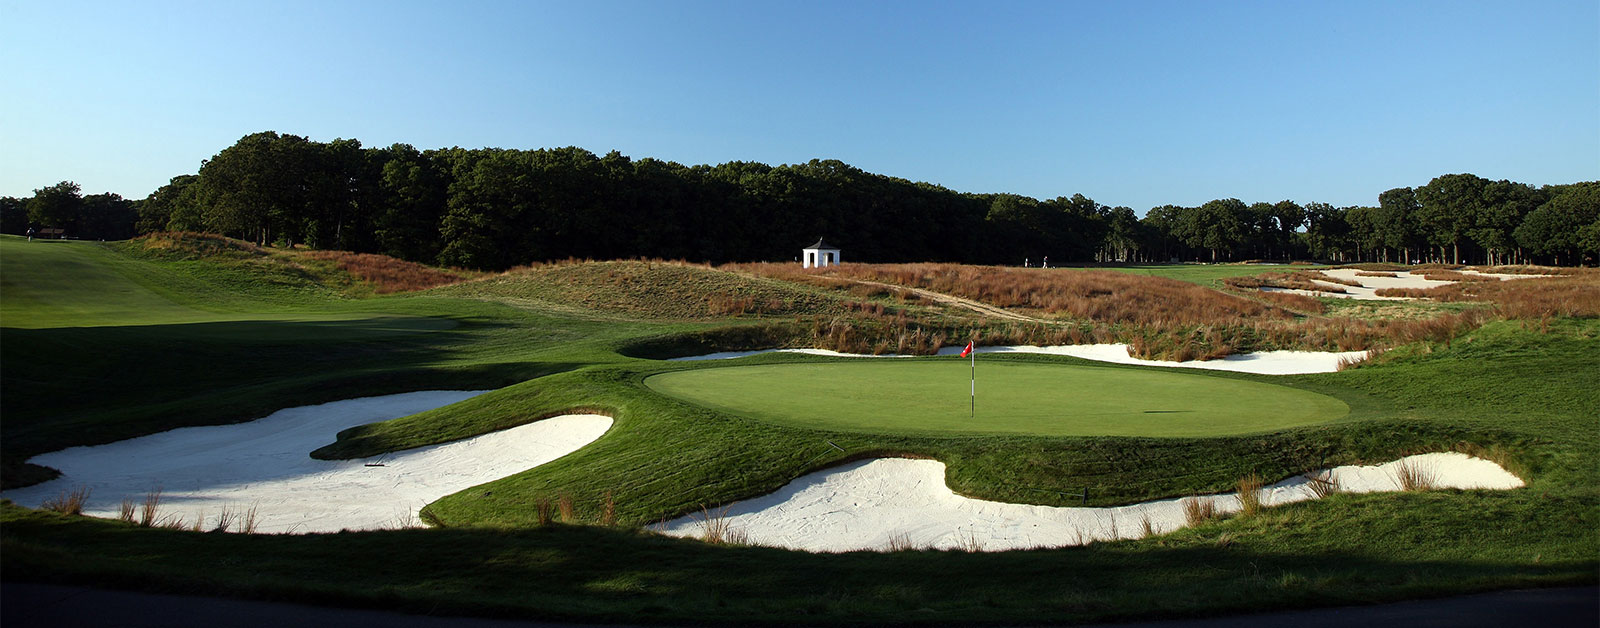 Bethpage Black Course